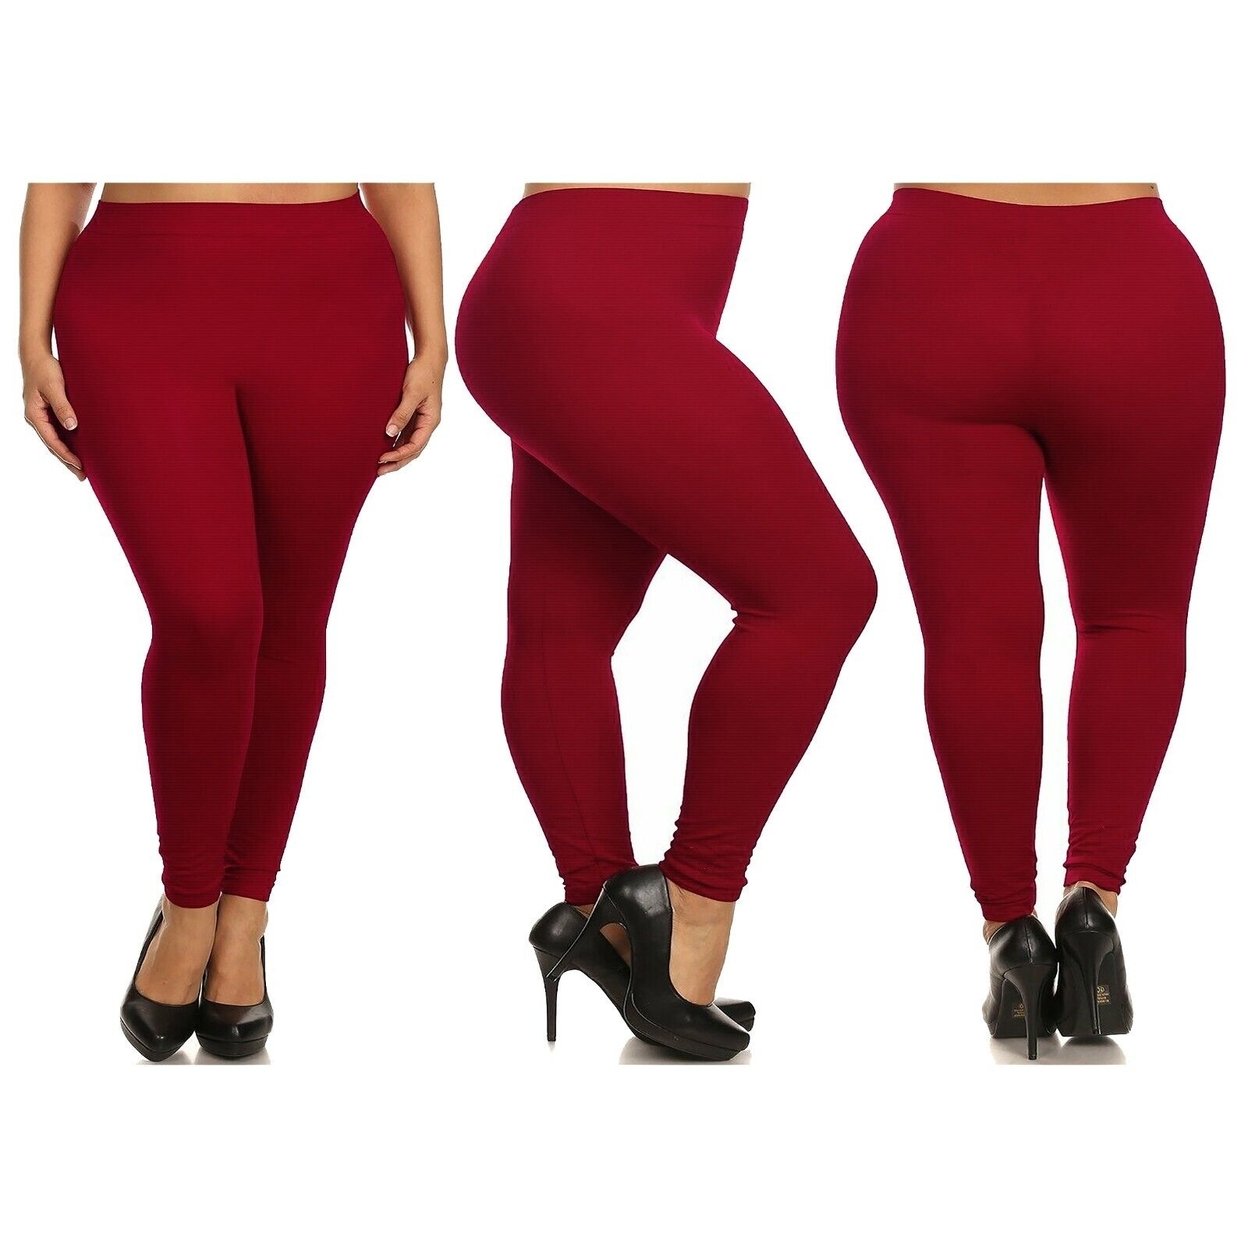 Multi-Pack: Women's Casual Ultra-Soft Smooth High Waisted Athletic Active Yoga Leggings Plus Size Available - 3-pack, 4x